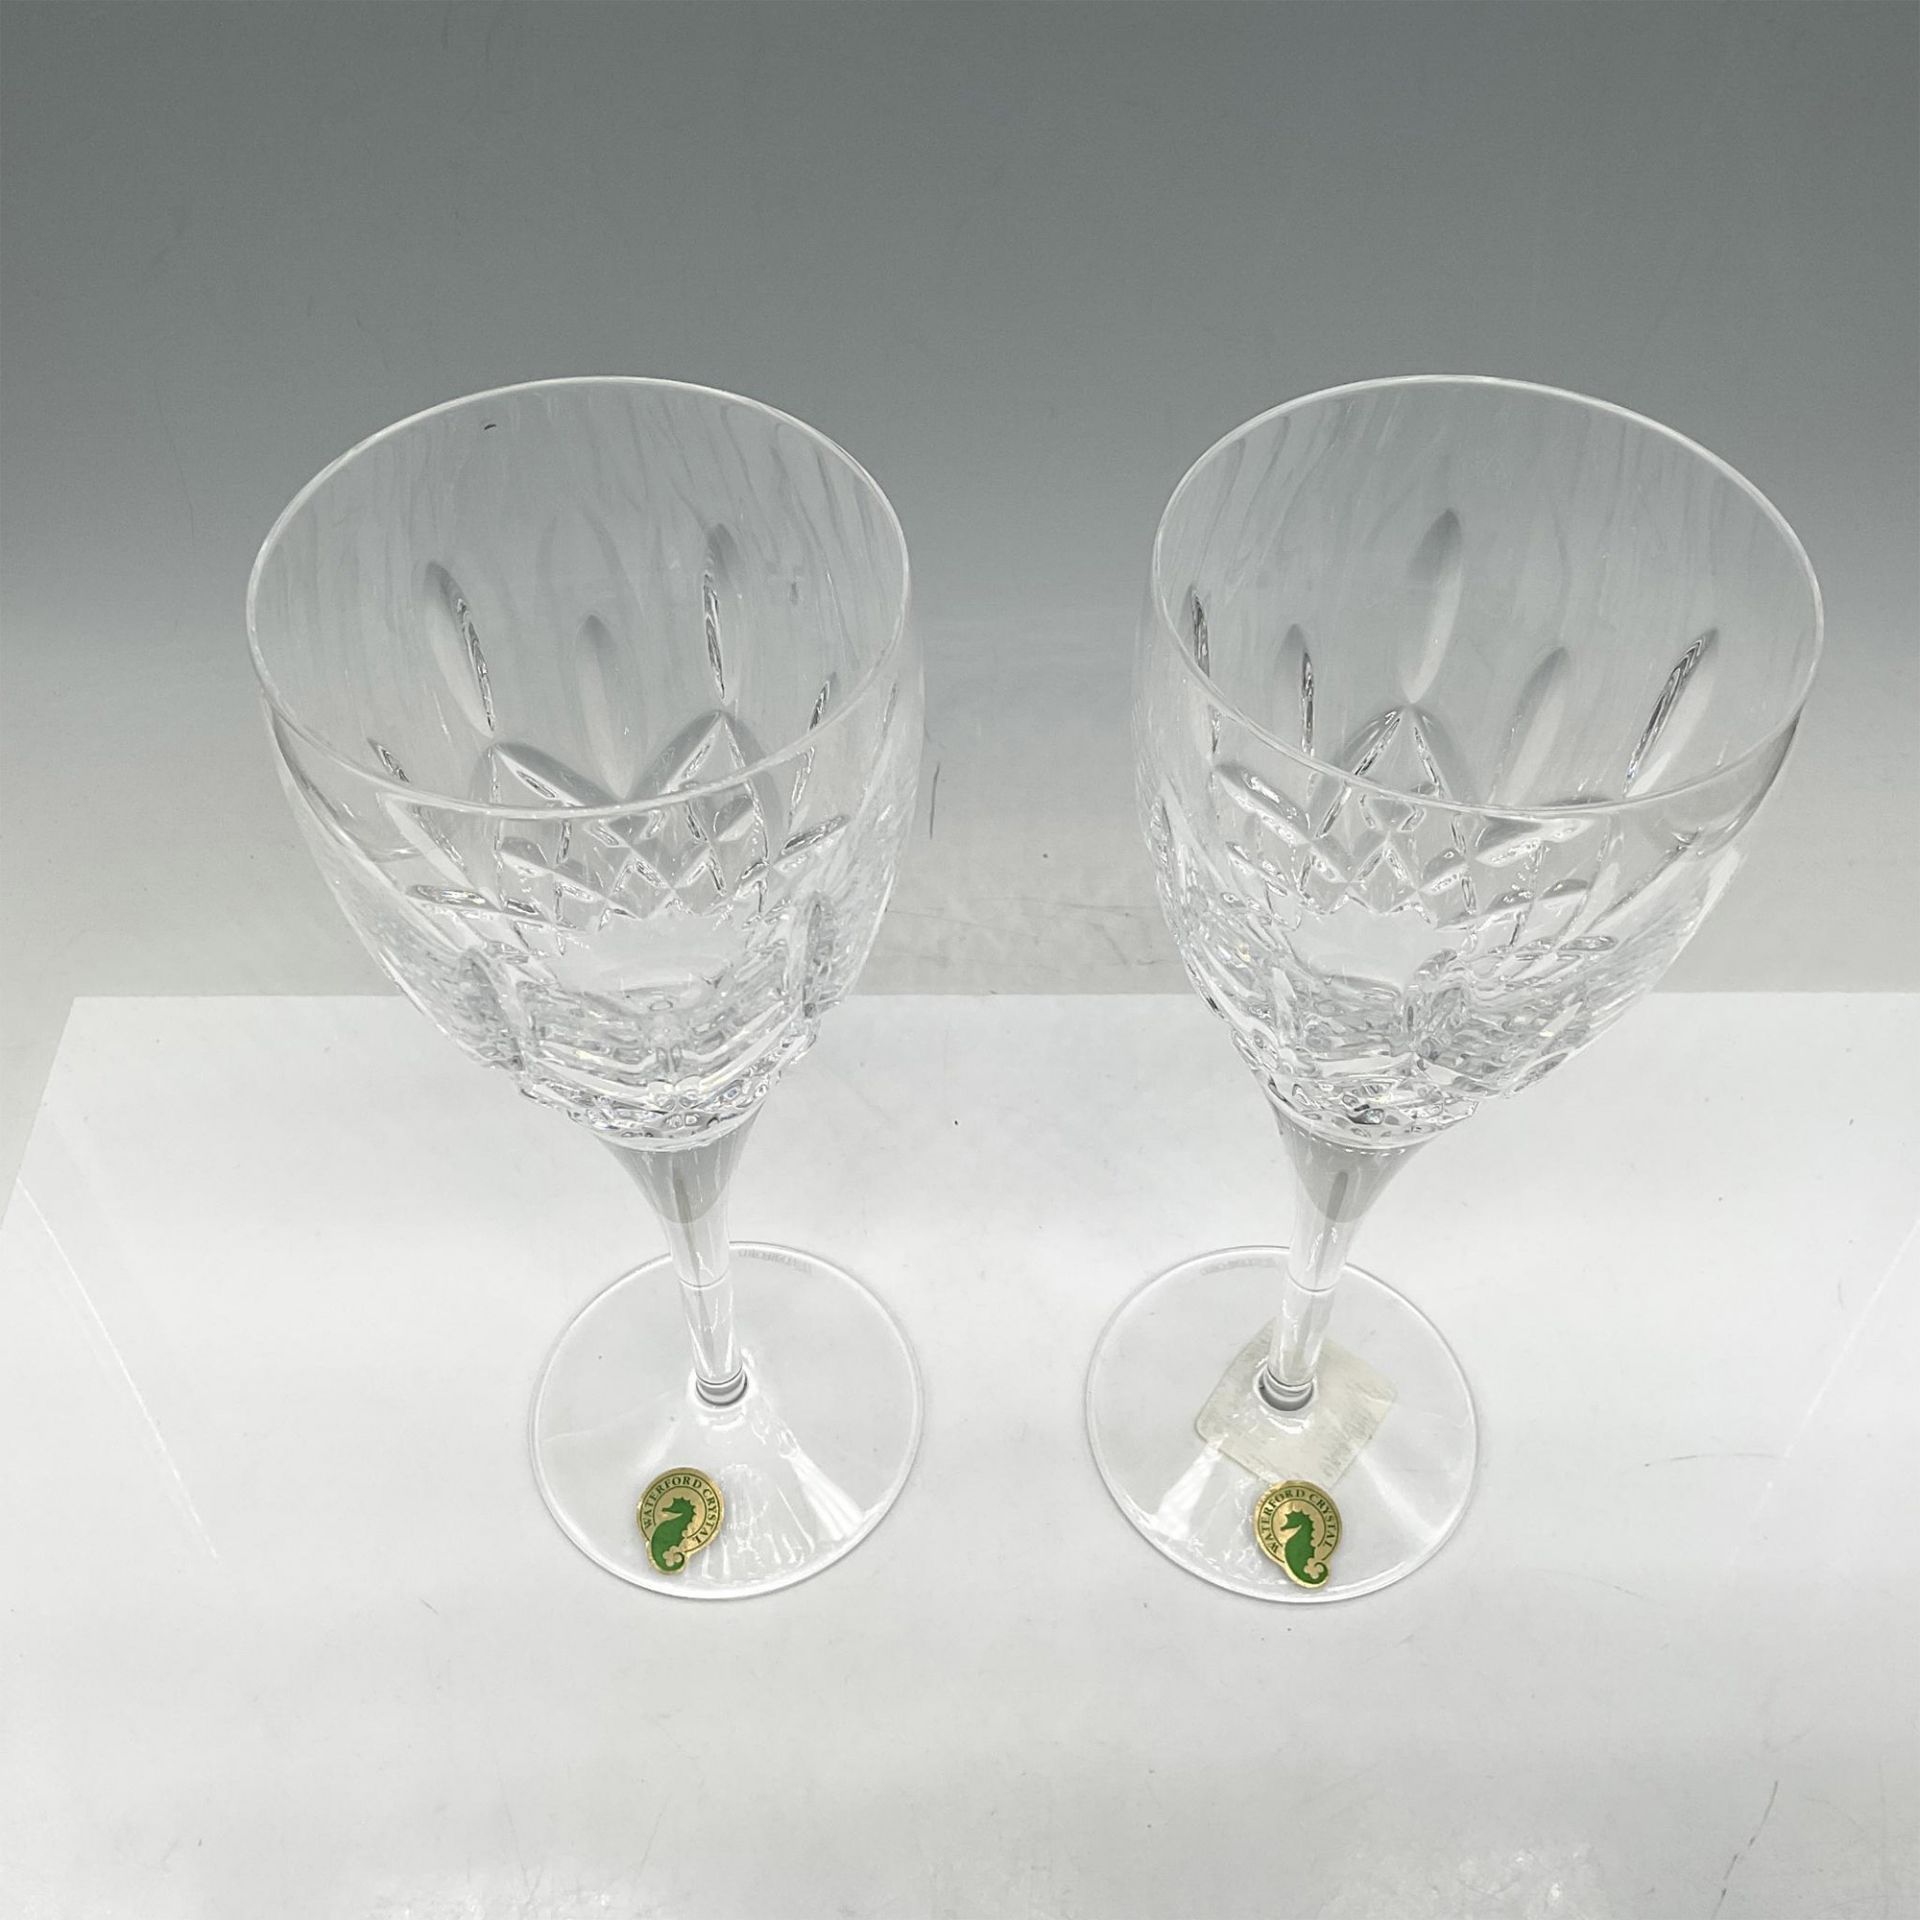 Pair of Waterford Crystal Goblets, Lismore Nouveau - Image 2 of 4